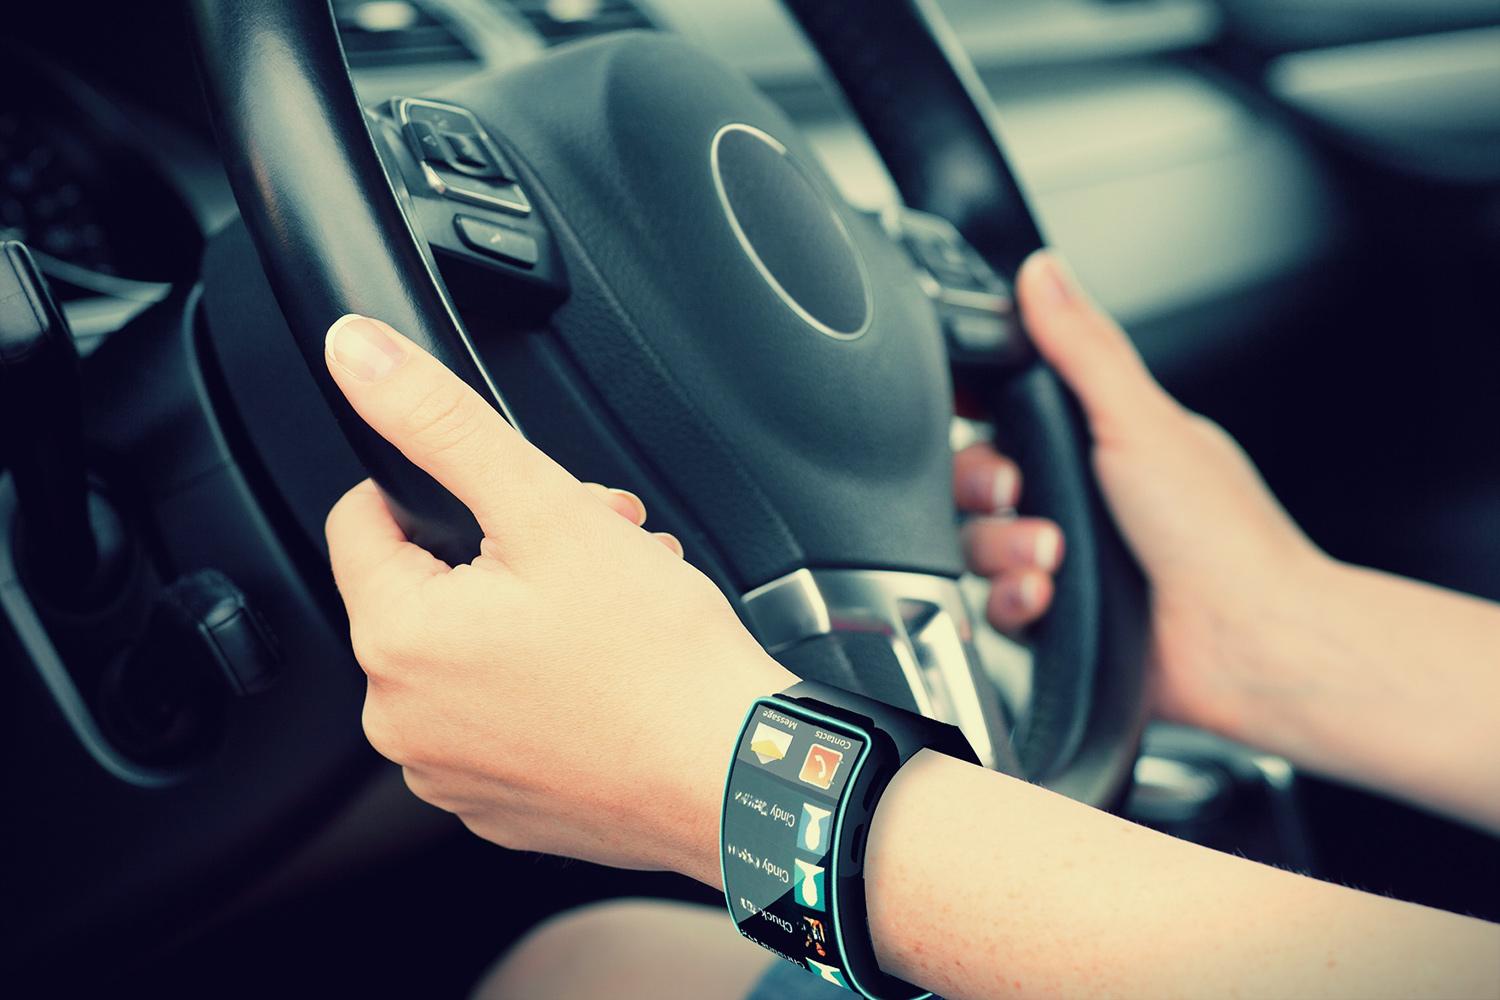 iwatch no thanks i want to ditch my key fob for a smartwatch that goes vroom